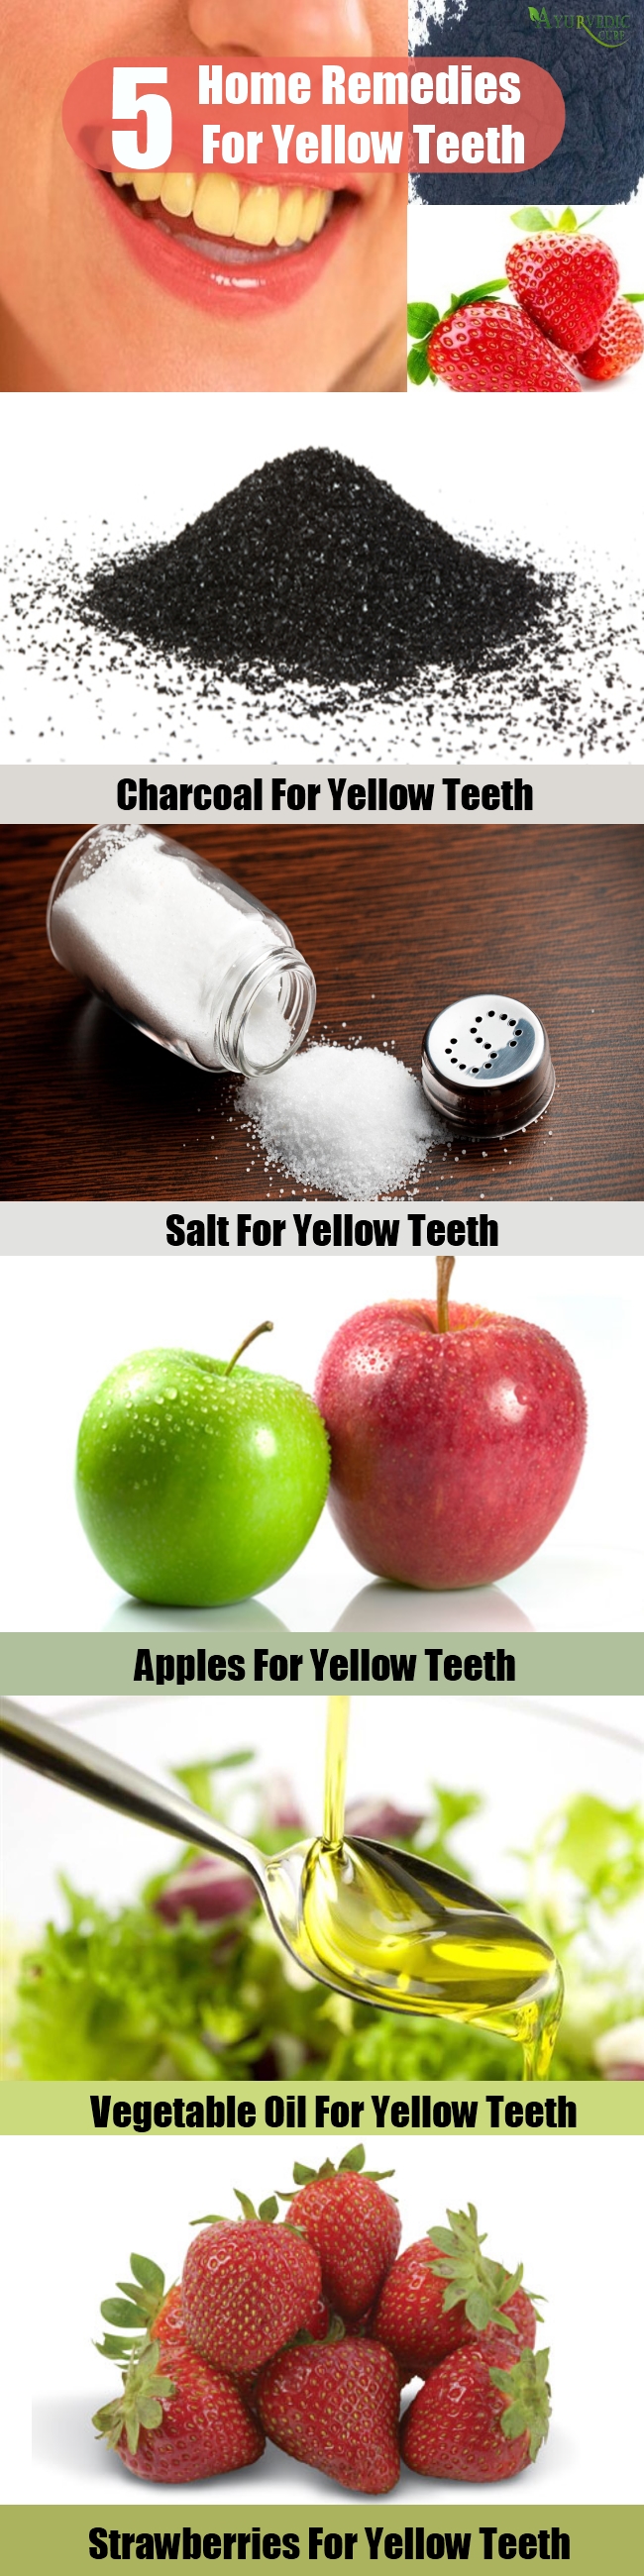 Top 5 Home Remedies For Yellow Teeth